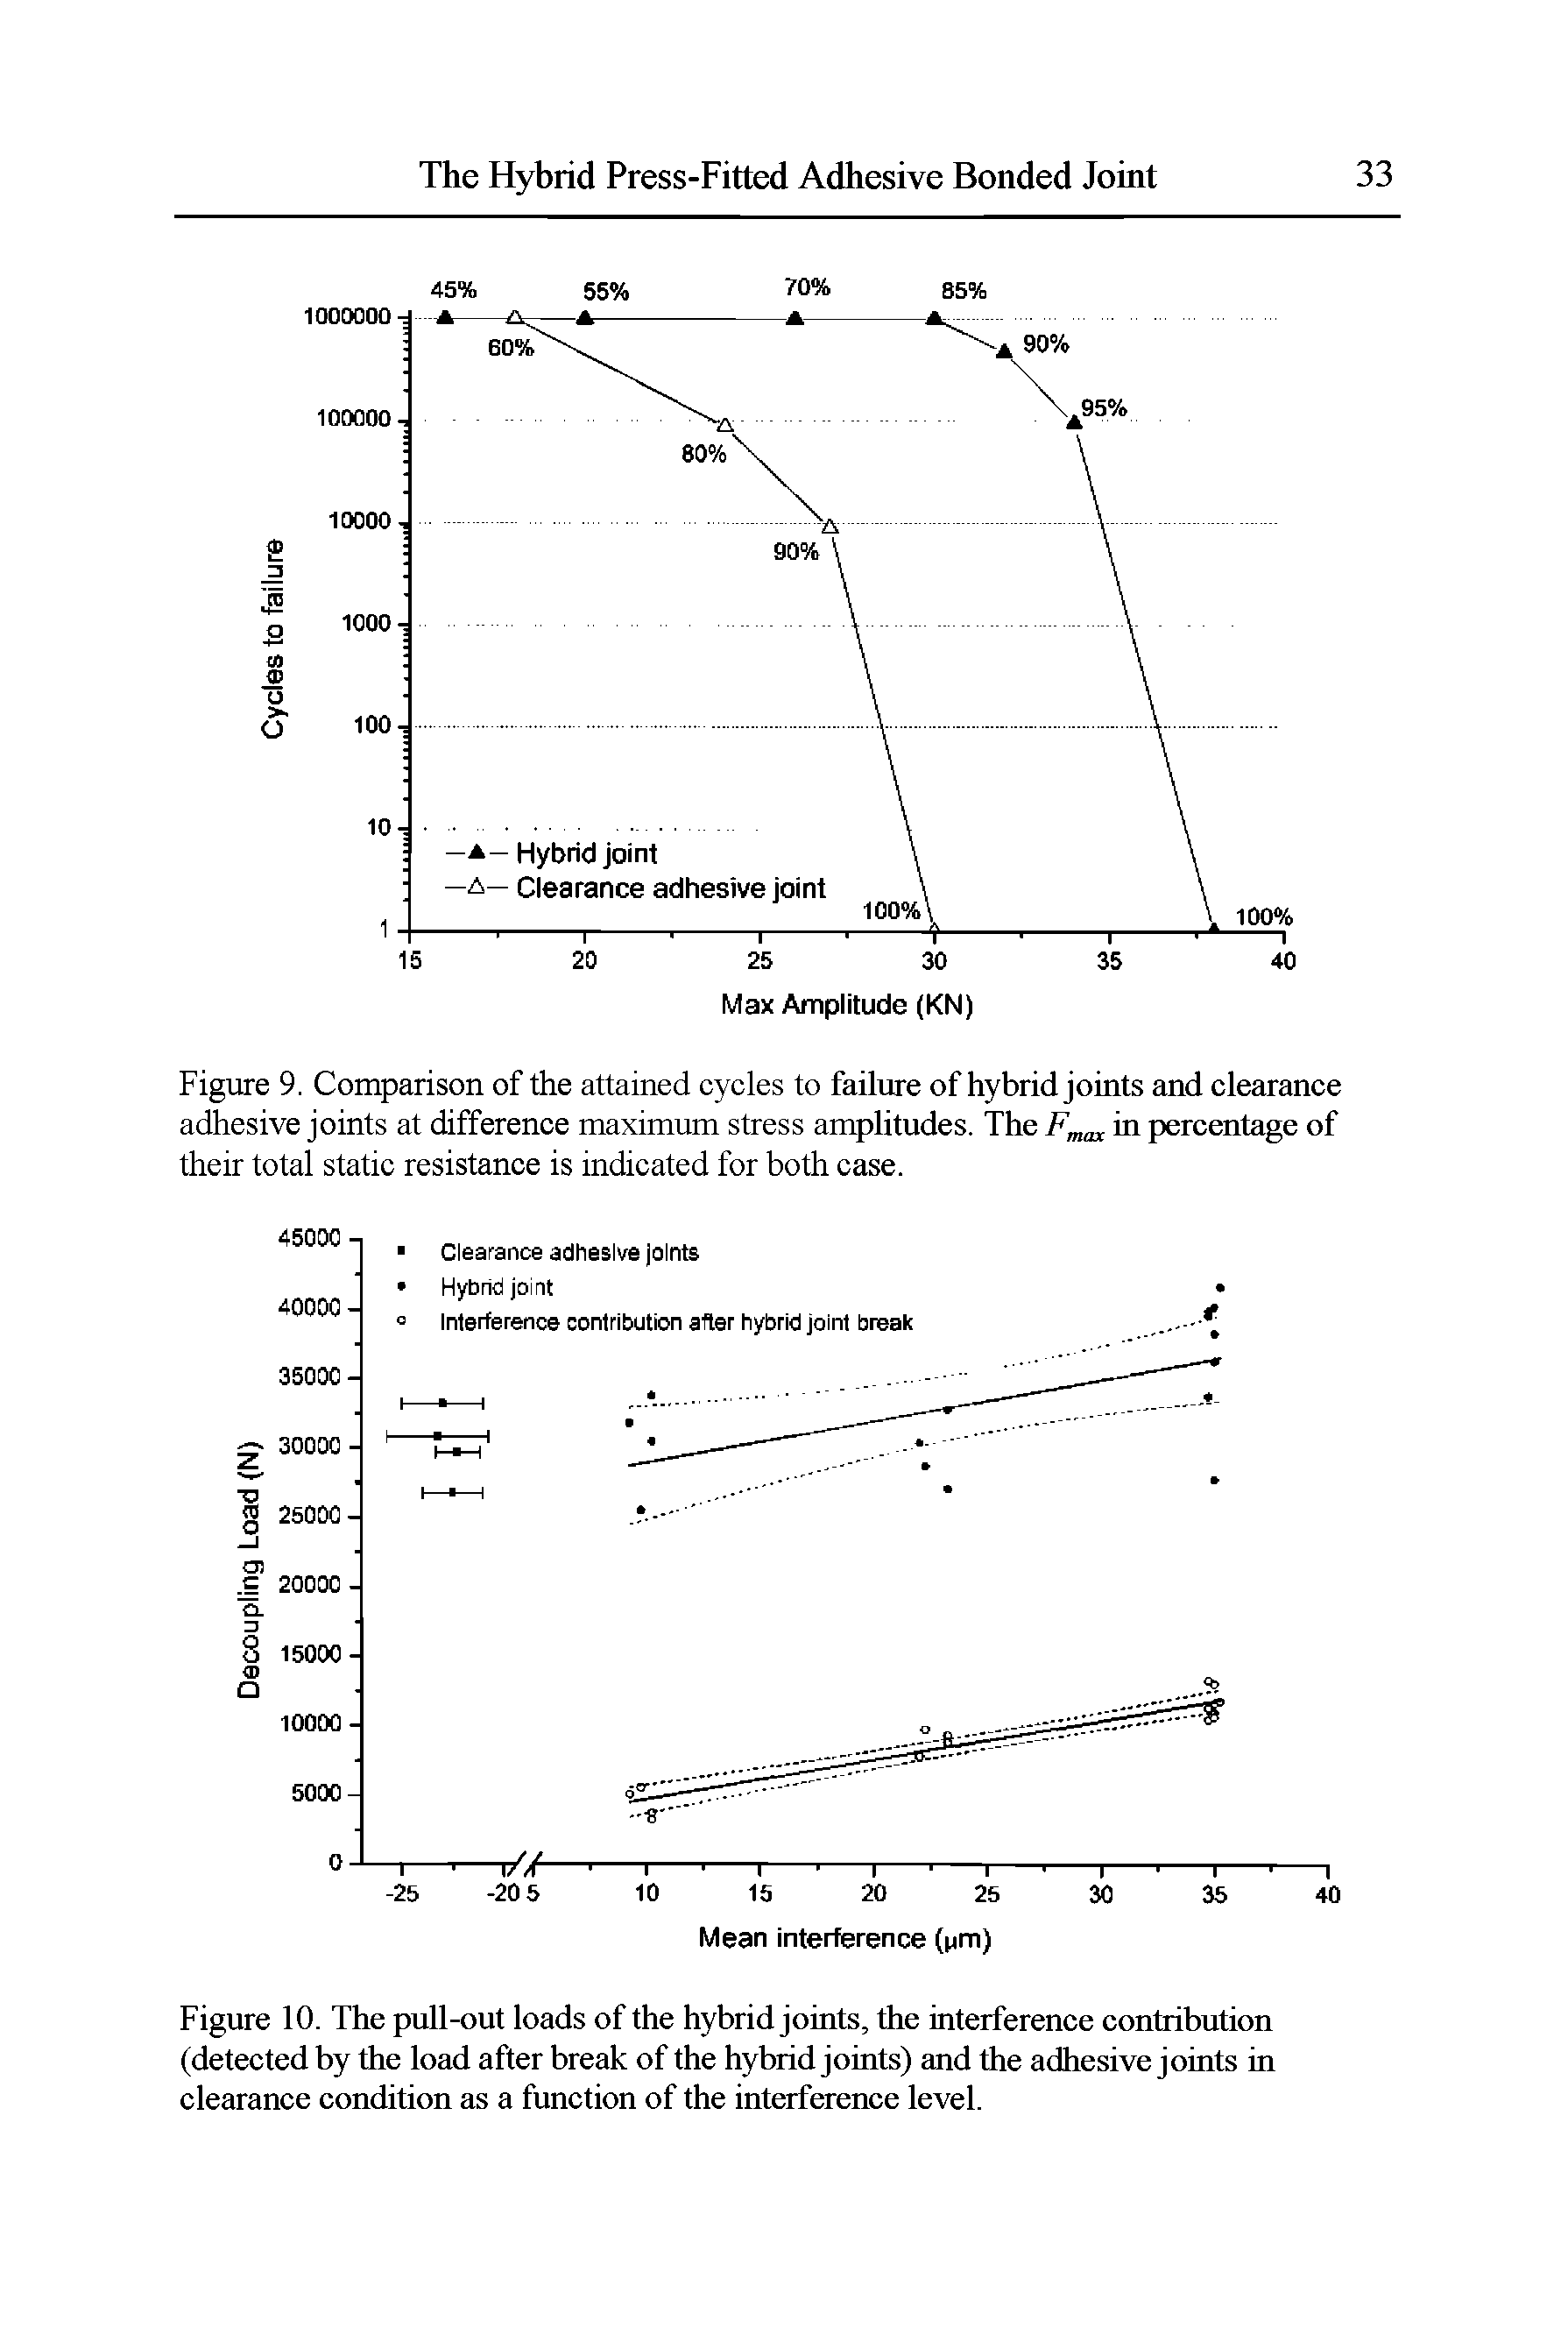 Figure 9. Comparison of the attained cycles to failure of hybrid joints and clearance adhesive joints at difference maximum stress amplitudes. The F ax in percentage of their total static resistance is indicated for both case.